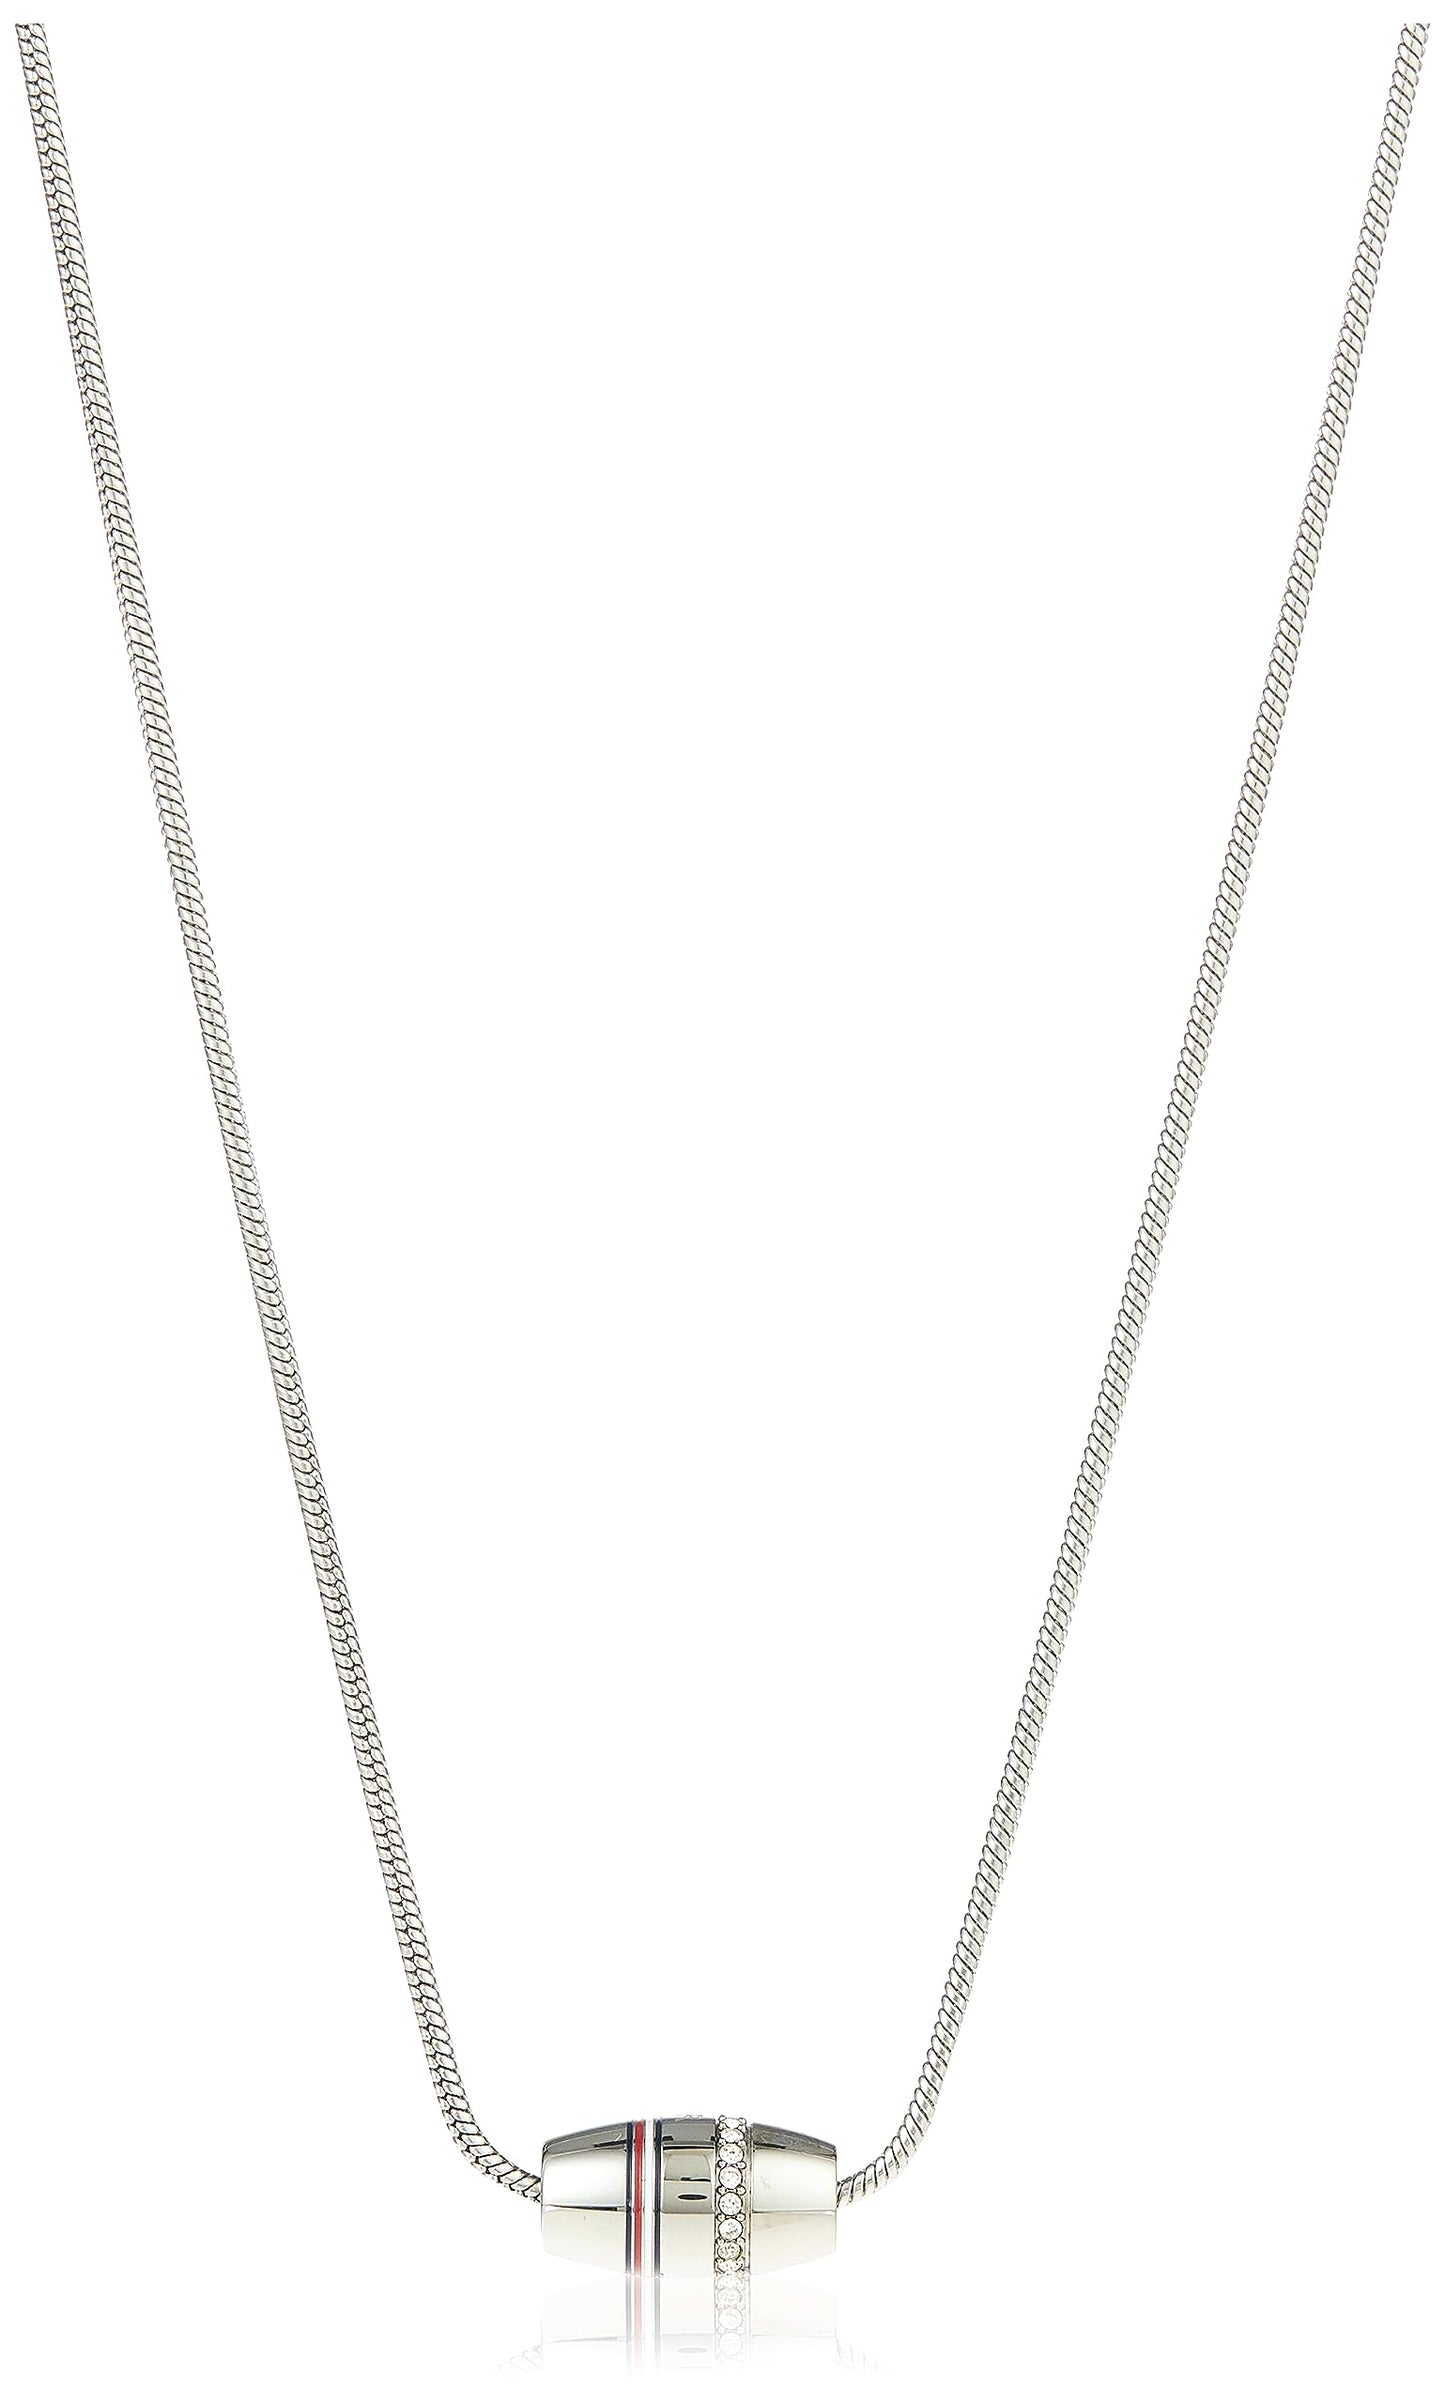 Tommy Hilfiger Jewelry Women Stainless Steel Pendant Necklace Embellished With Crystals - 2780616, One Size, Steel, No Gemstone